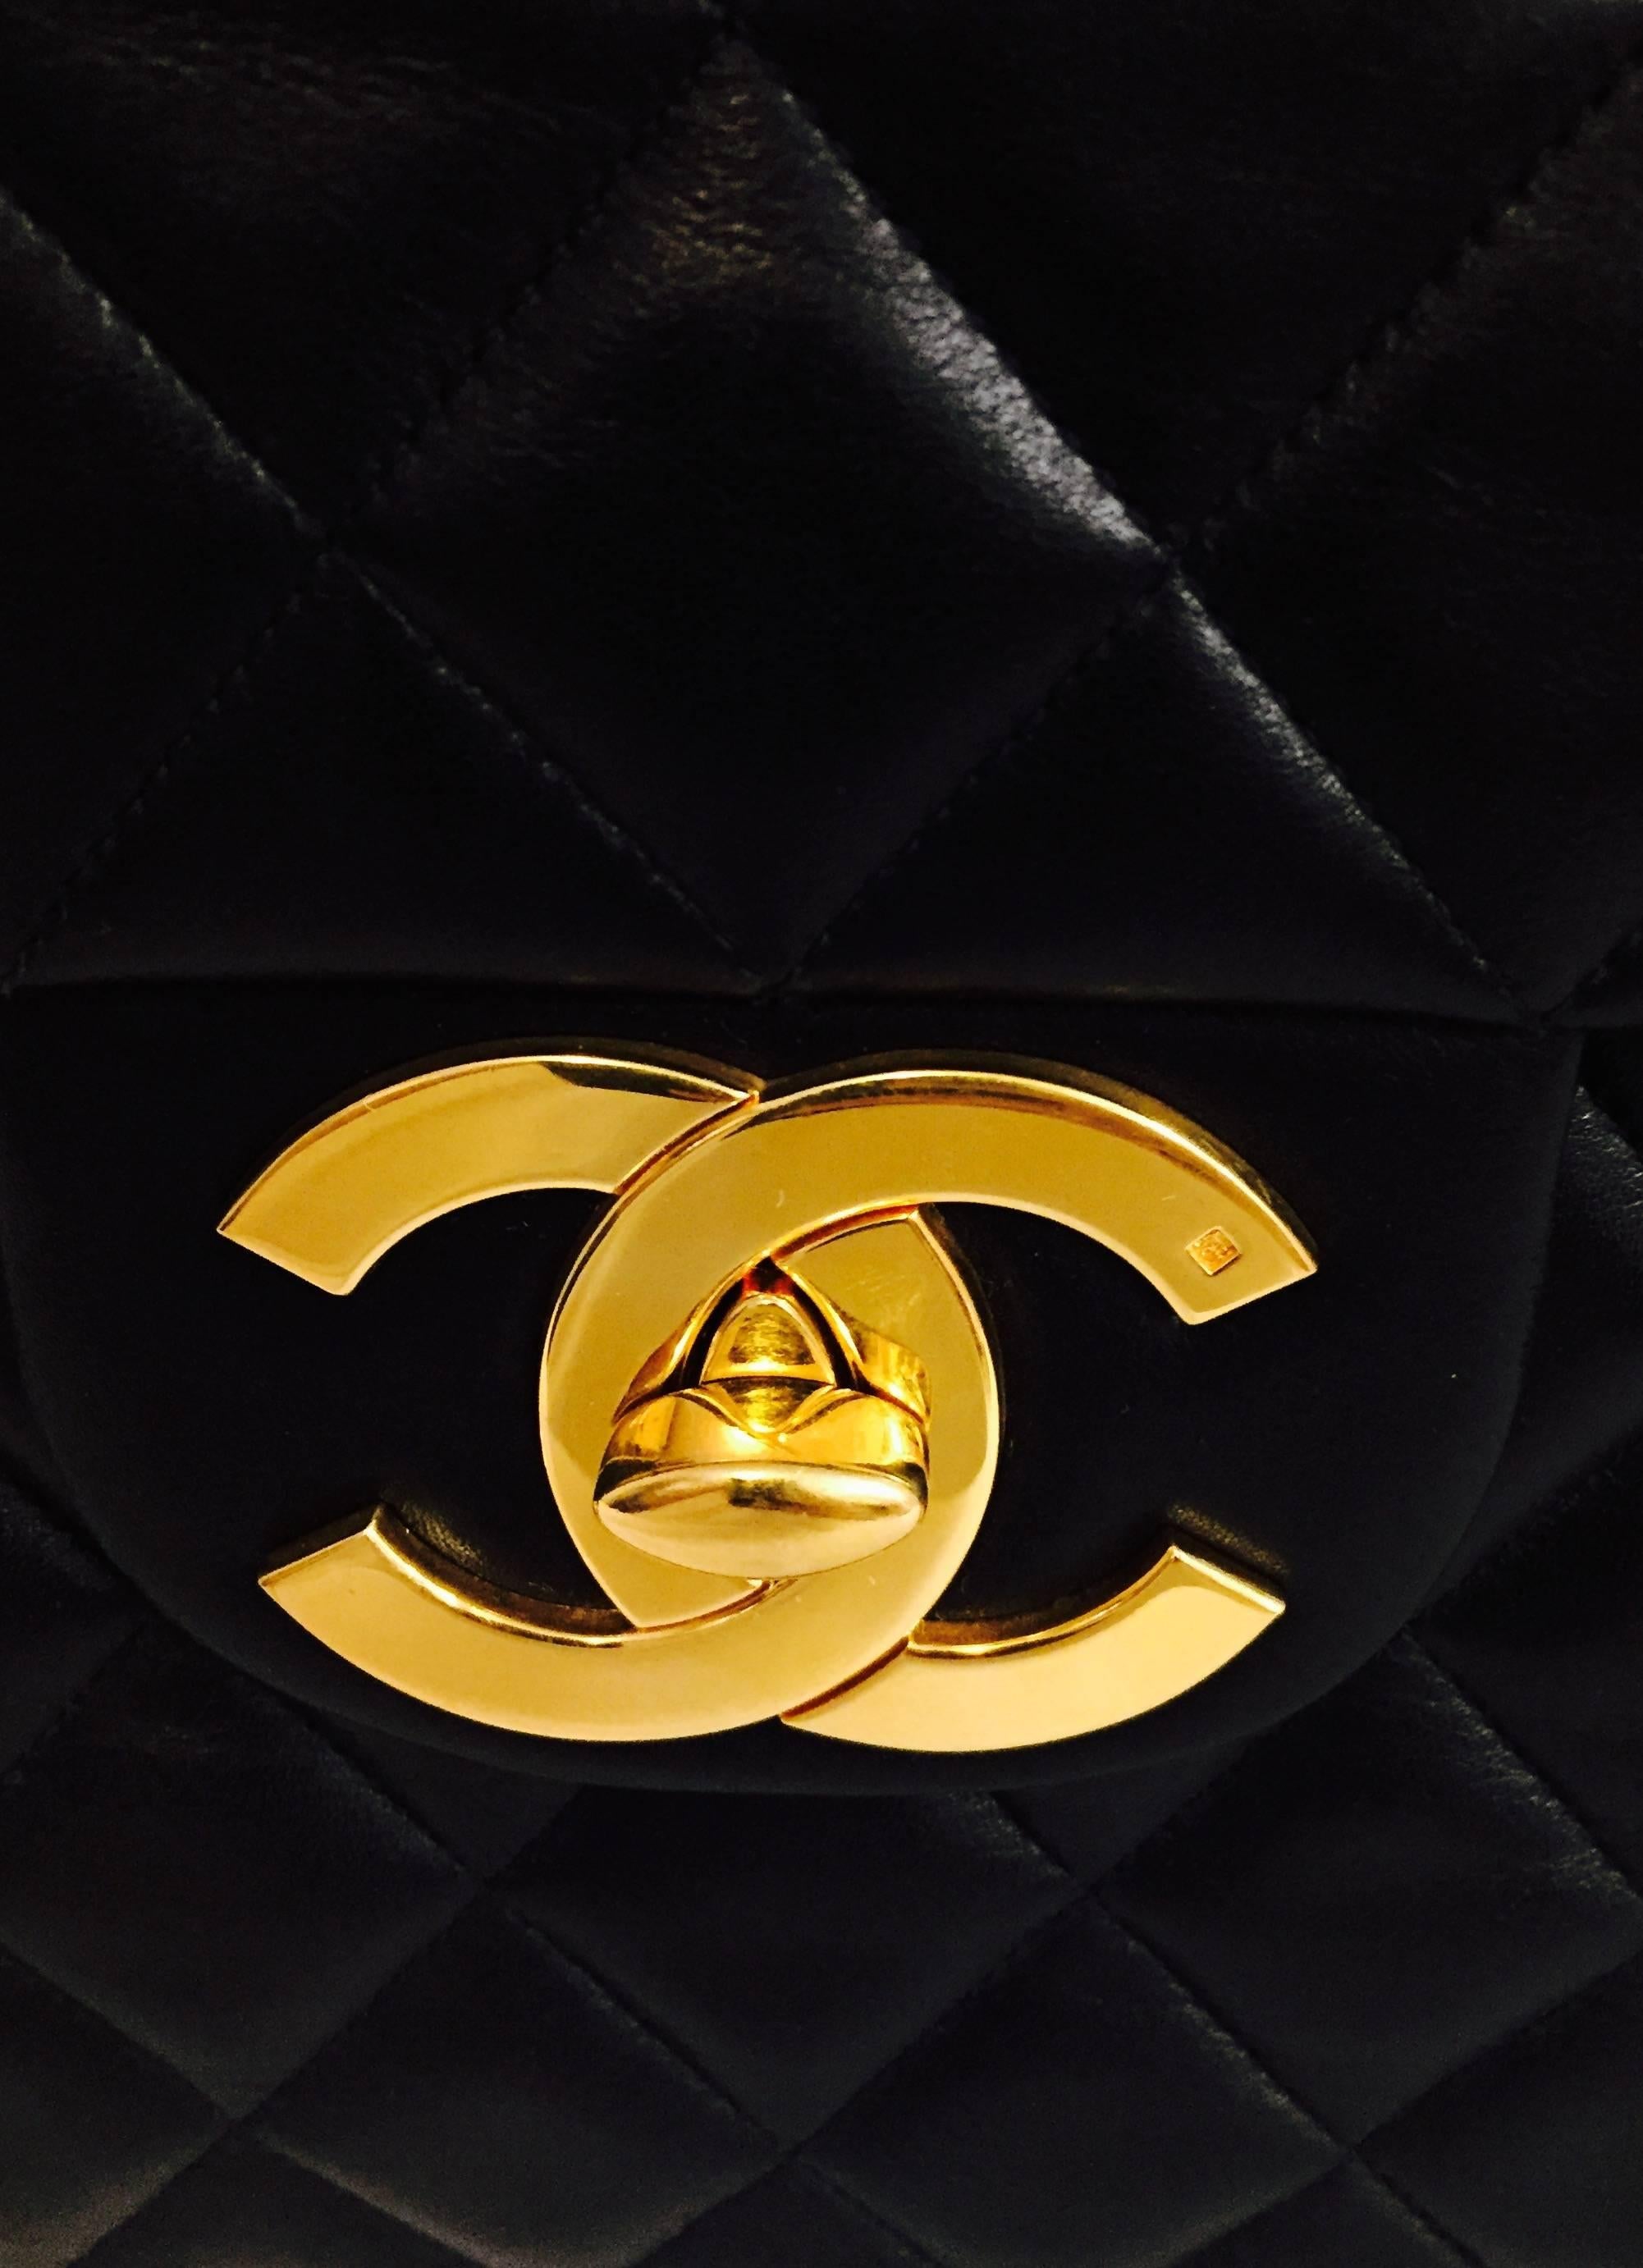 Classic Chanel Single Flap Handbag in Black Quilted Lambskin 2